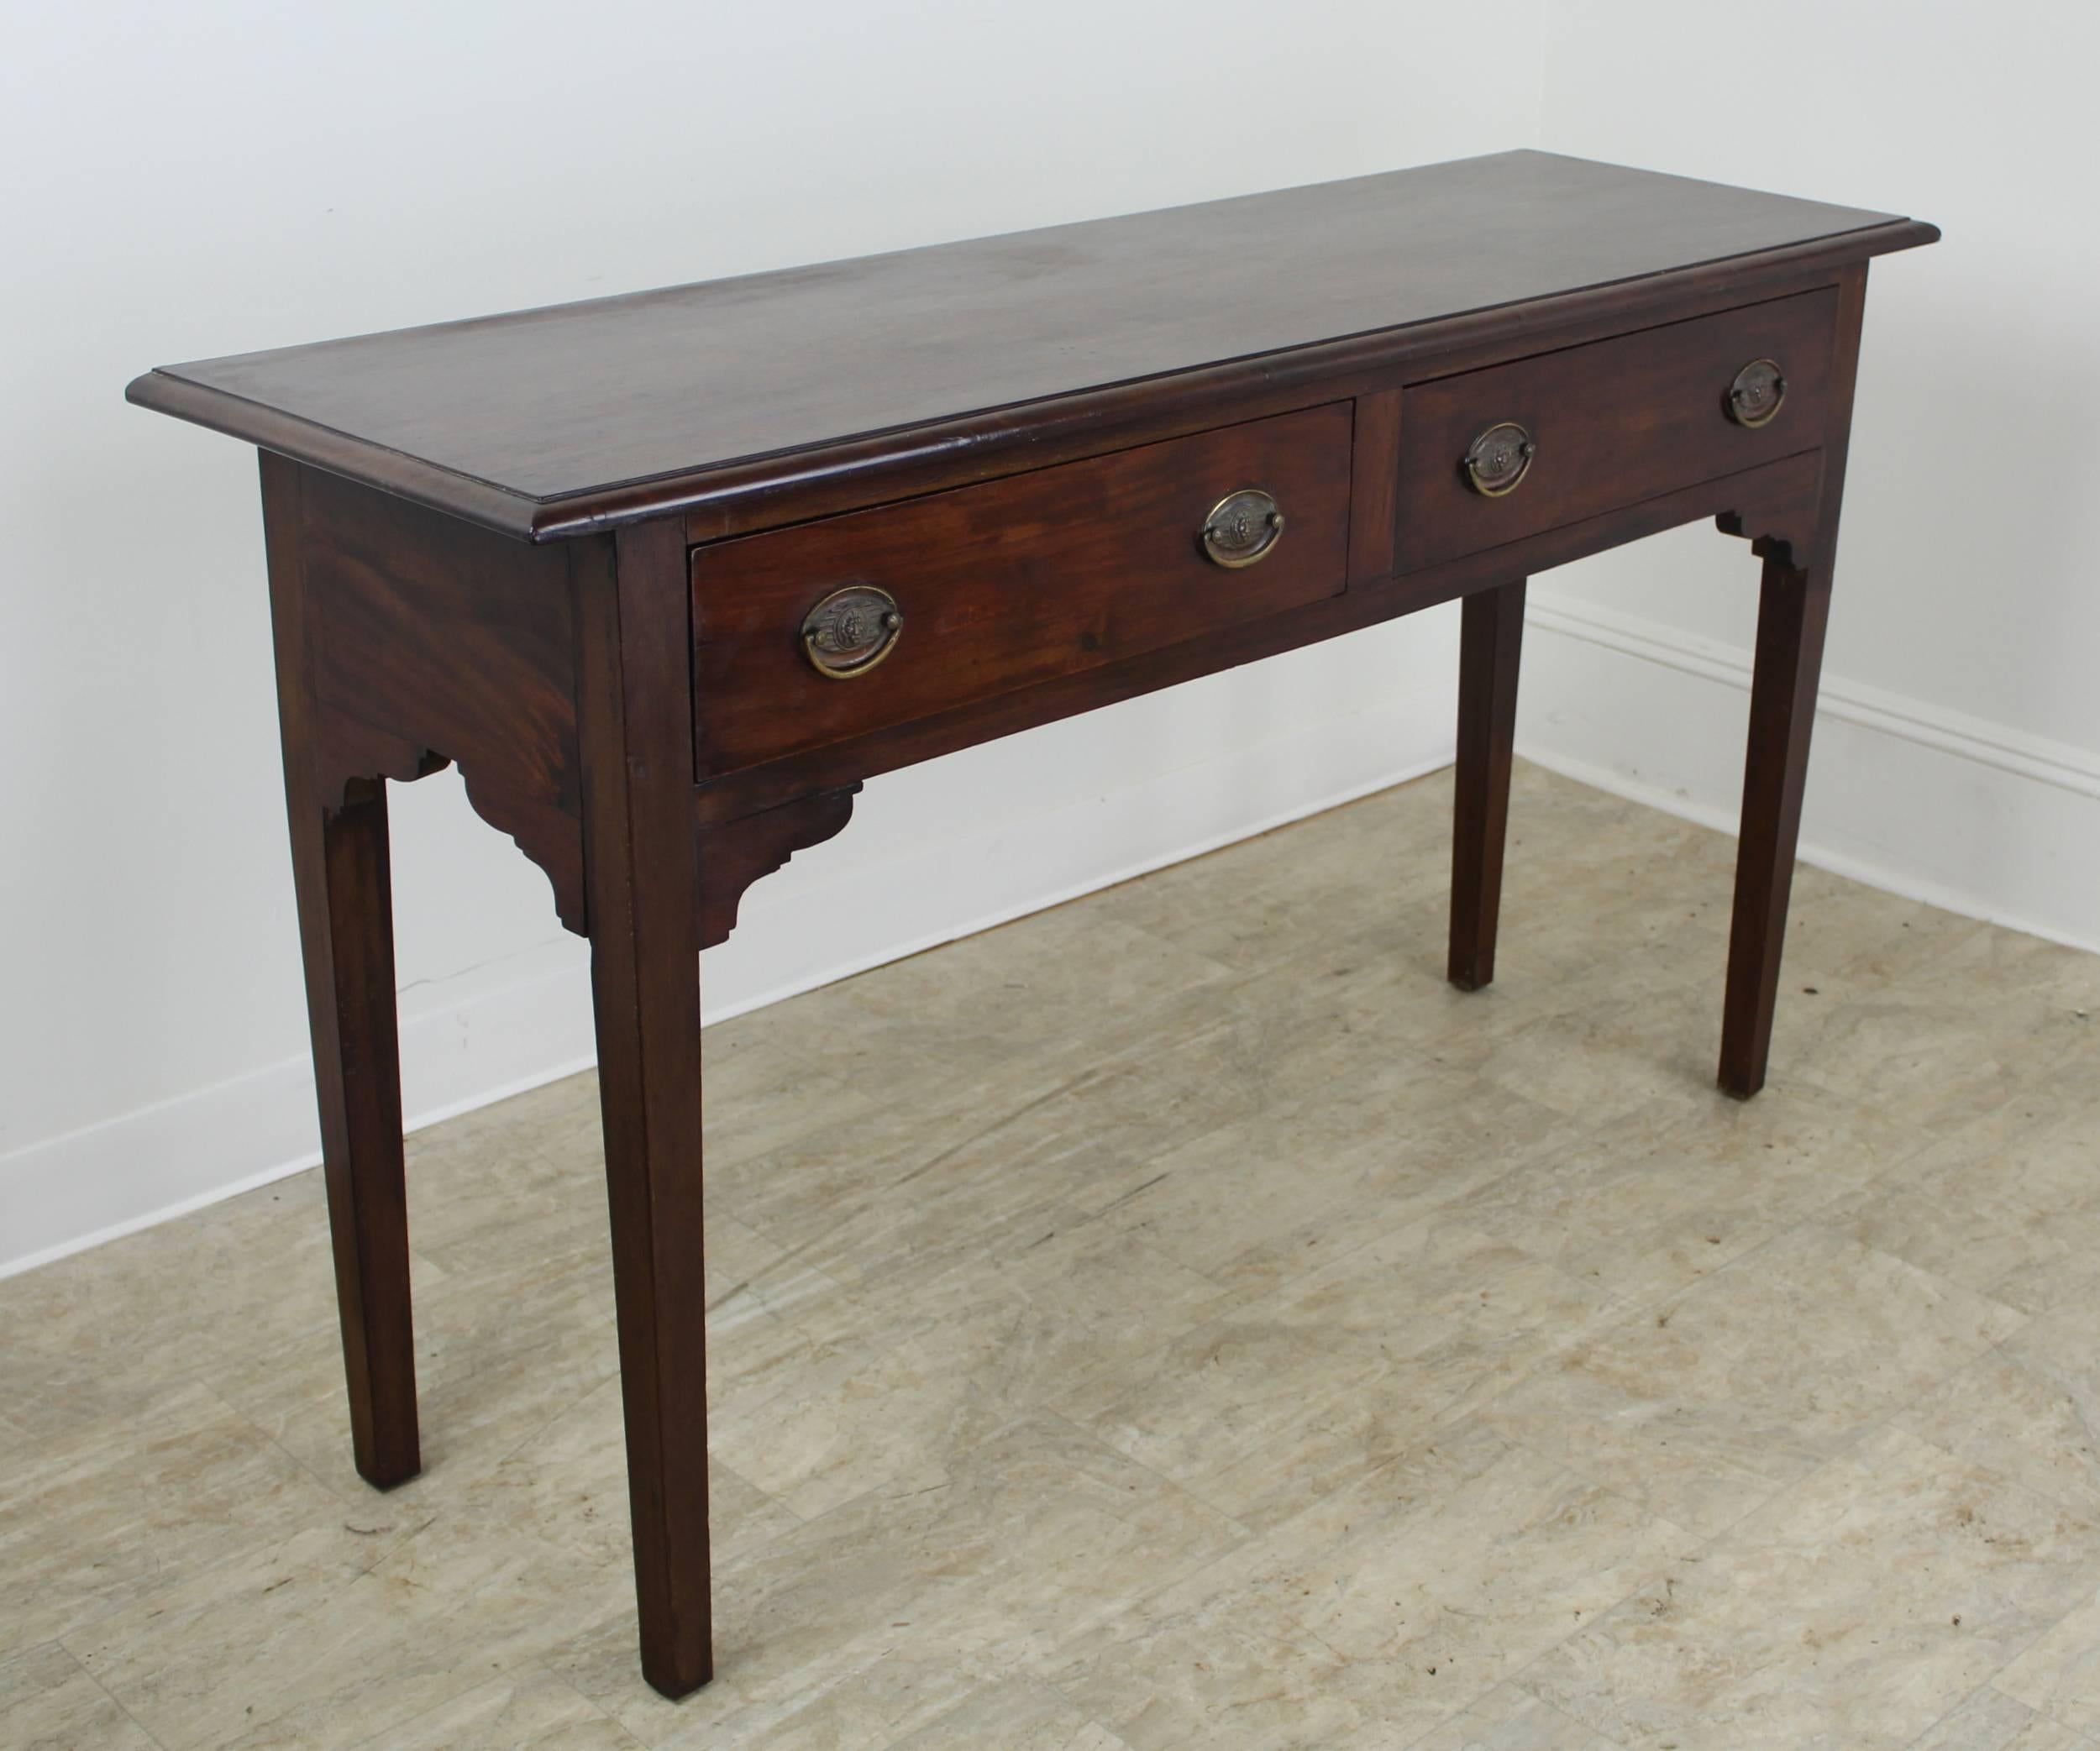 A wonderful walnut sideboard from England, circa 1860. Charmingly proportioned with beautiful color and patina. The perfect size for a smaller city dining room or entrance hallway. Both the beautiful walnut grain and the decorative carved supports